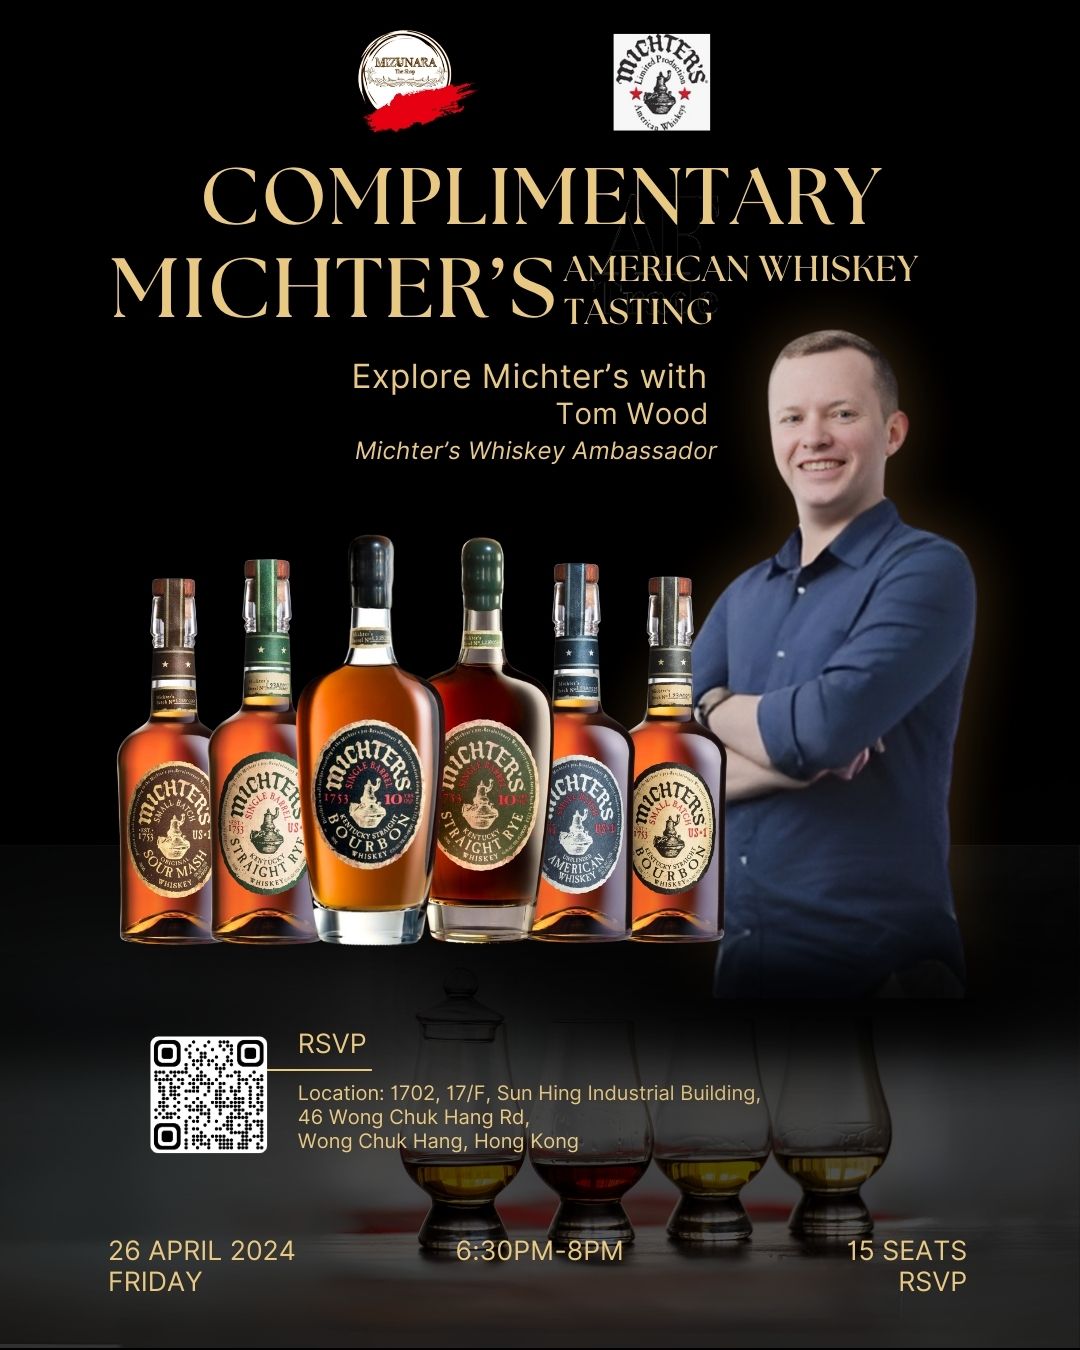 Explore Michter's American Whiskey with Guest Speaker, Tom Wood - Complimentary Tasting Event 26 April 2024